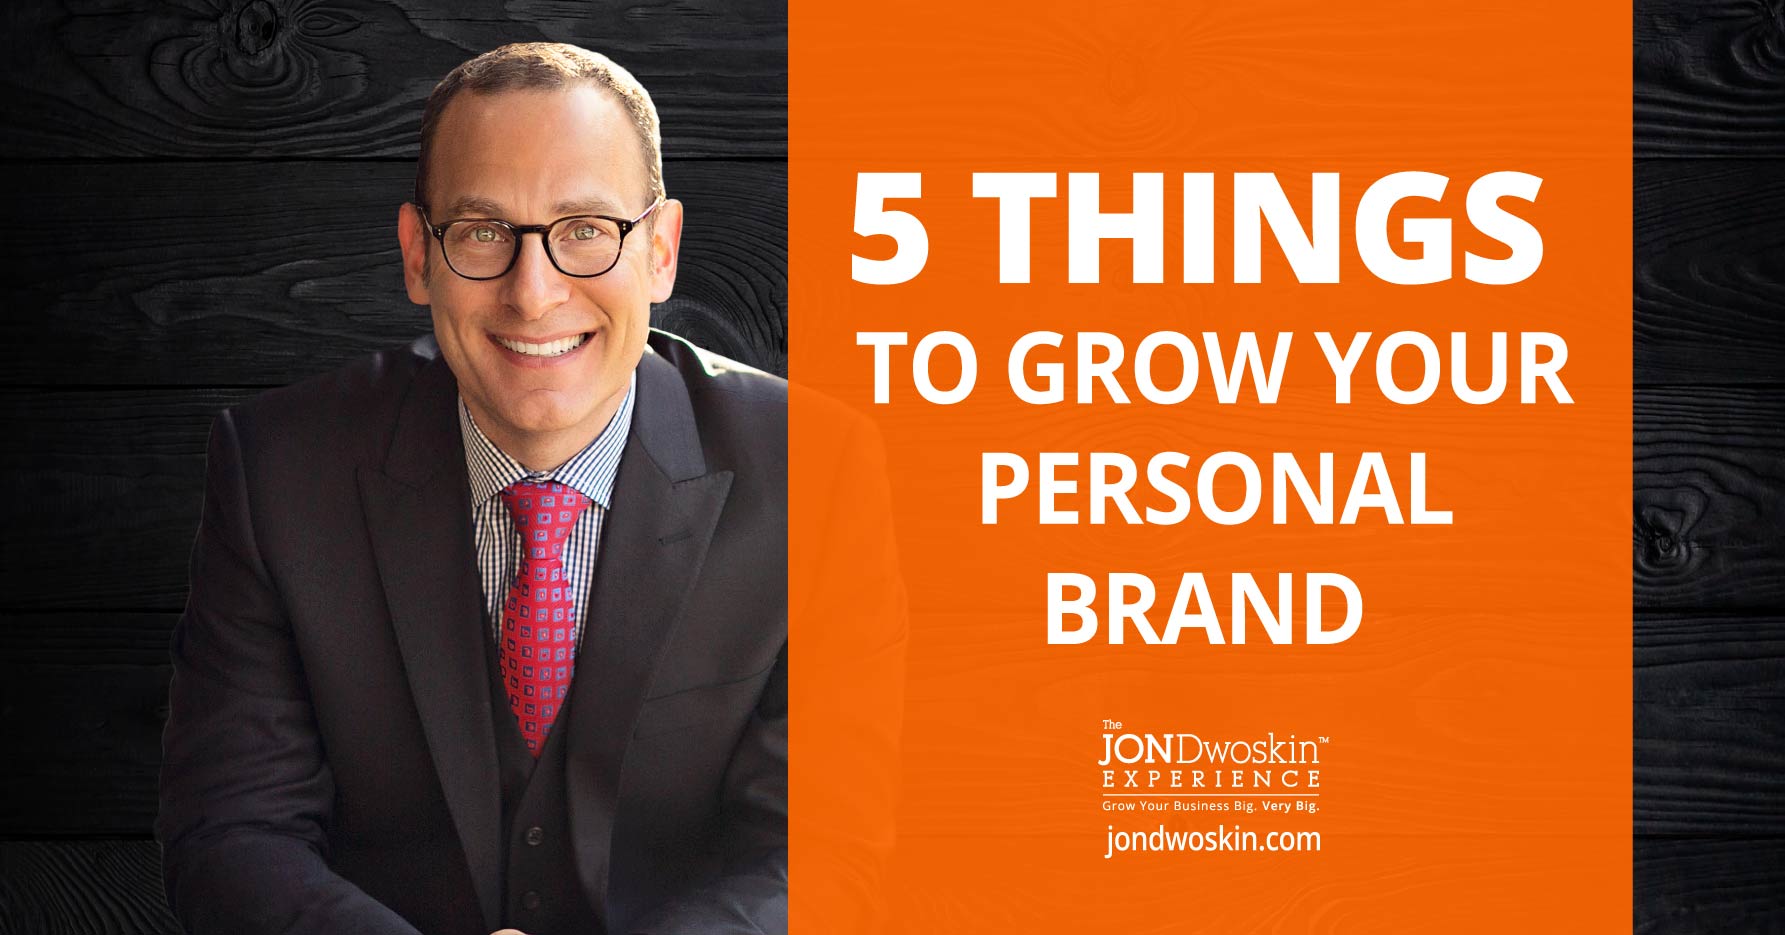 5 Things to Grow Your Personal Brand